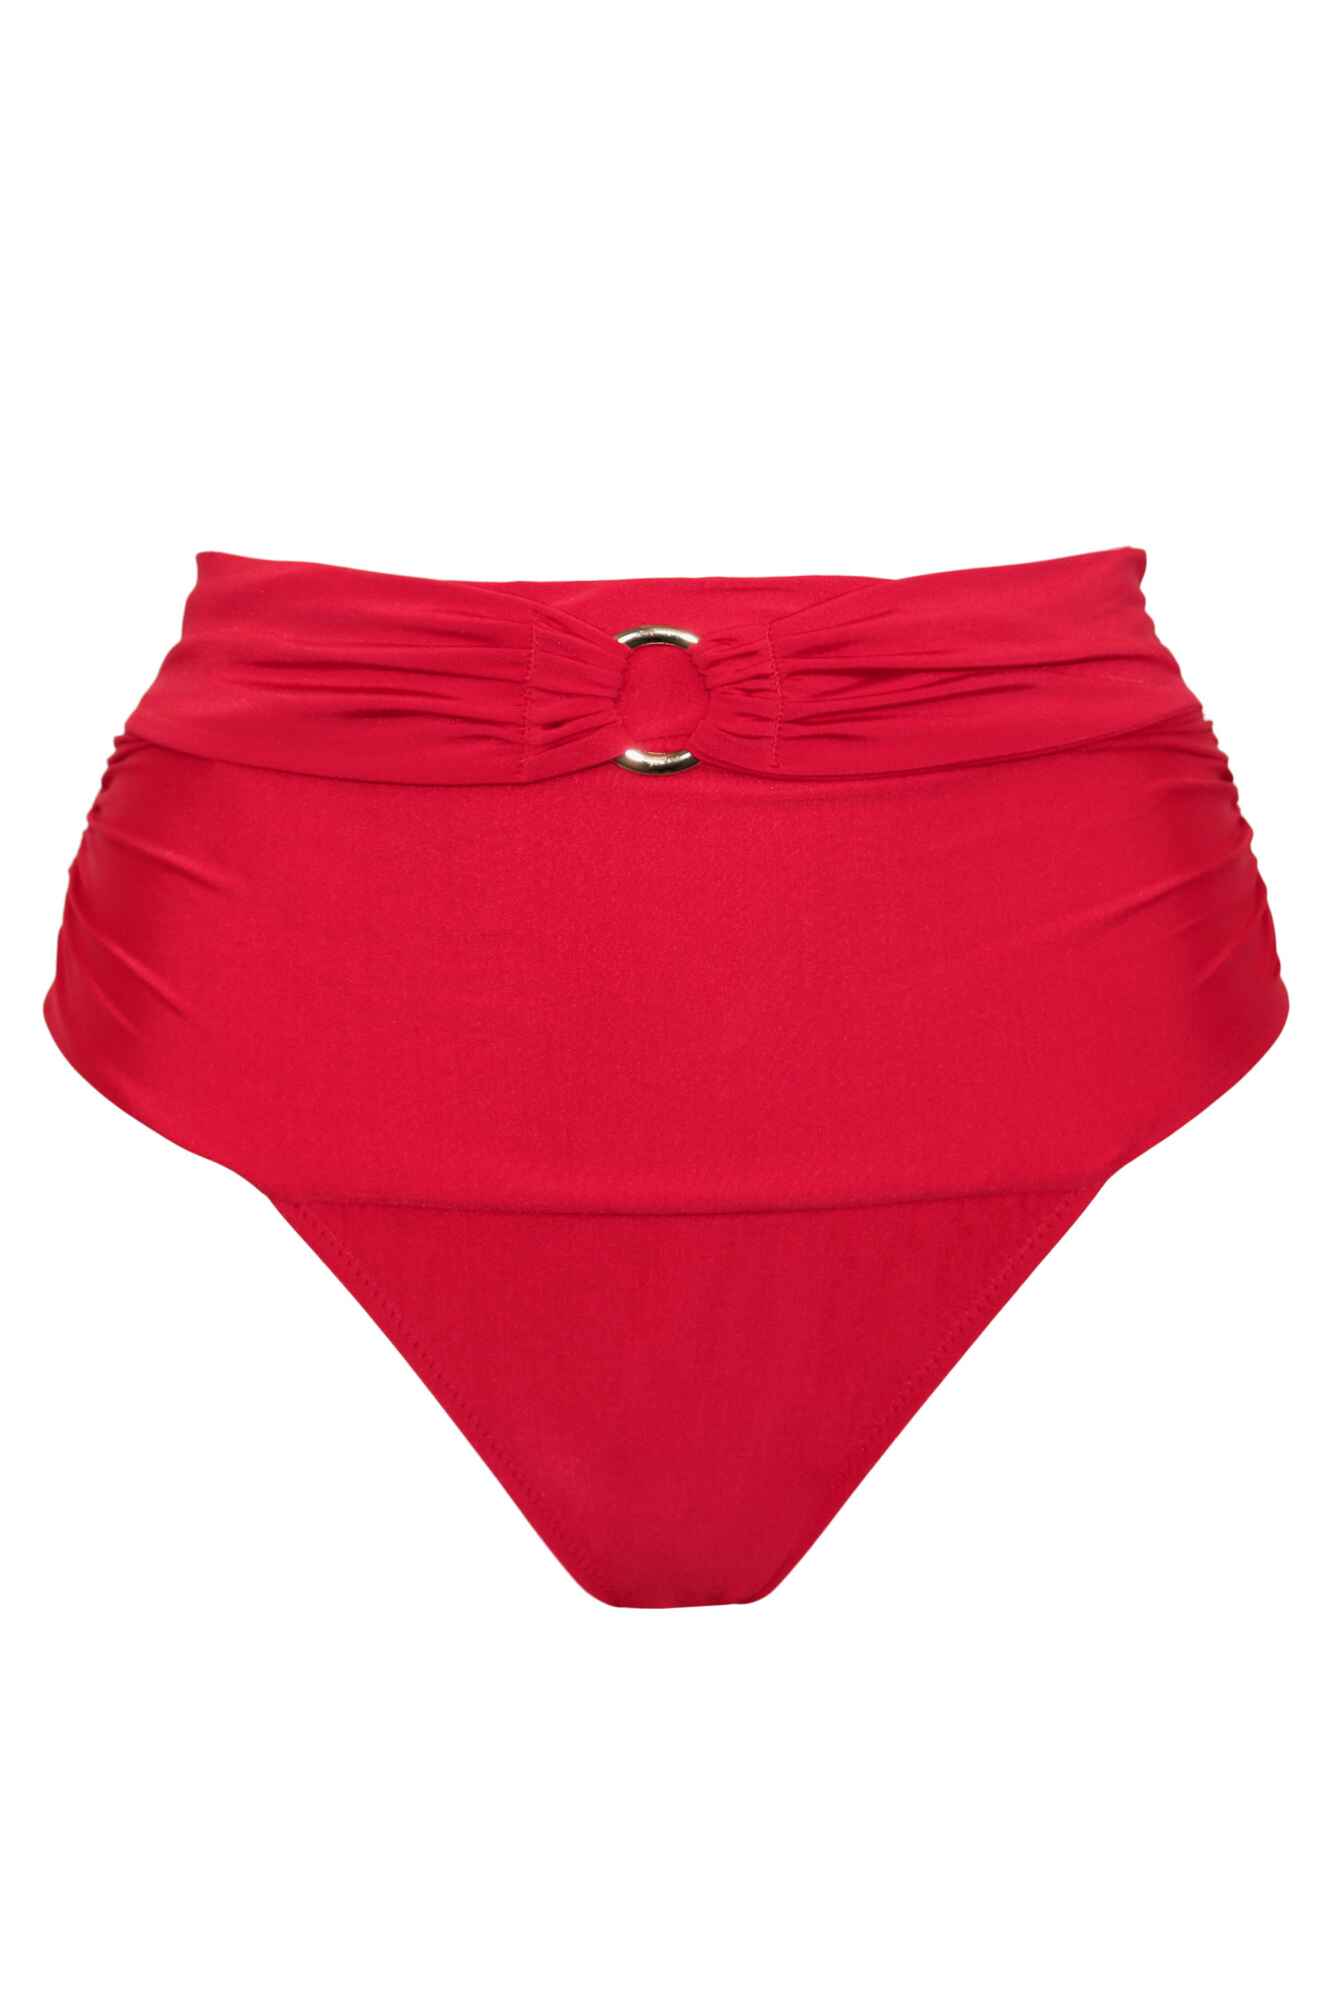 Pour Moi Horizon Super High Waisted Brief Swim Bottom in Red FINAL